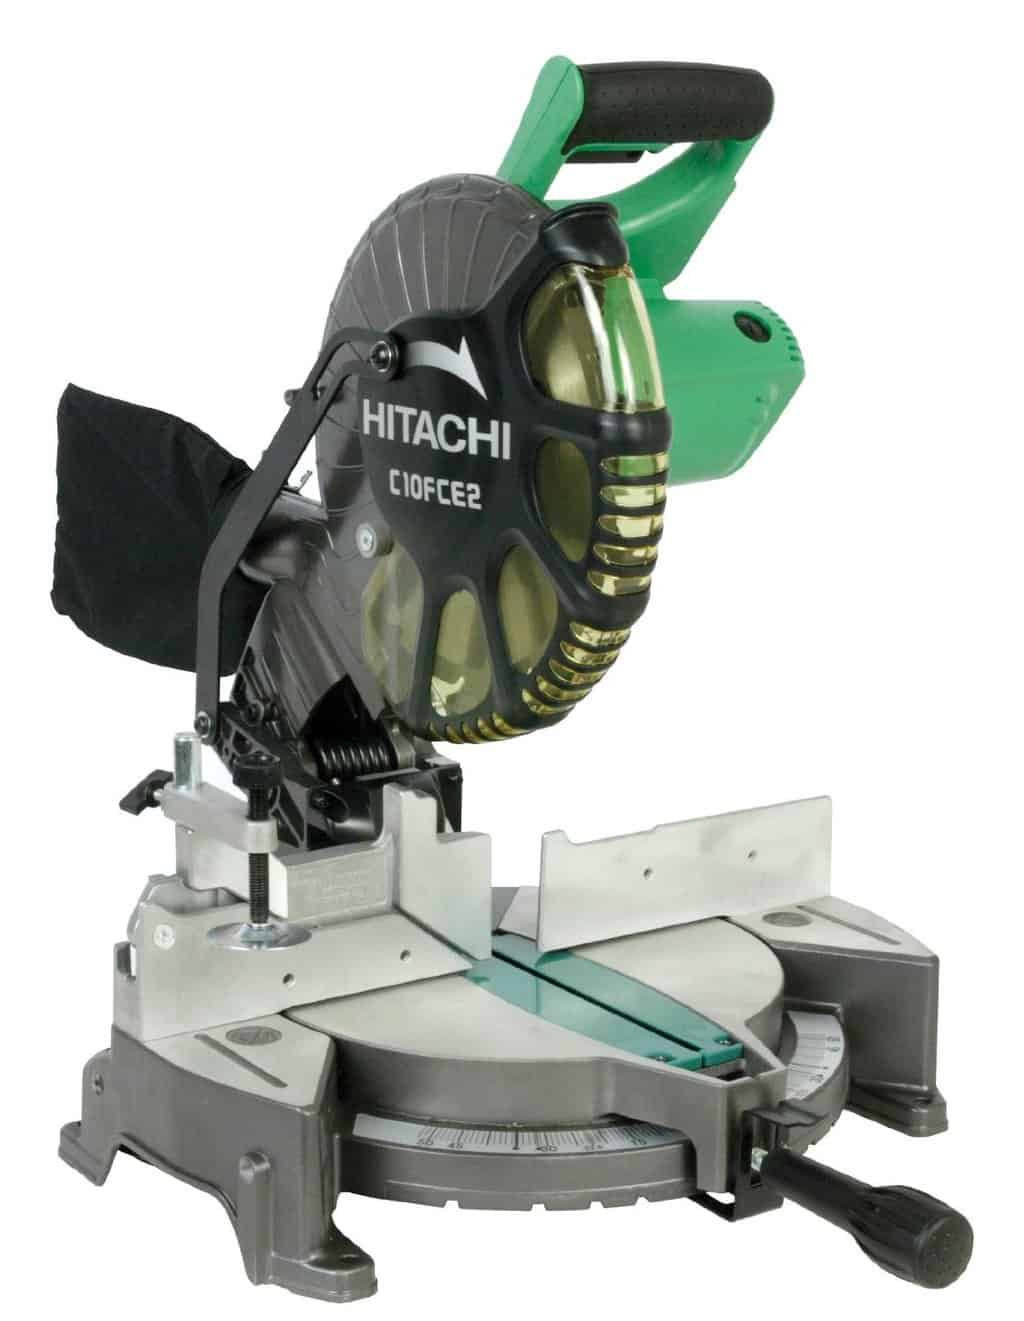 Best Miter Saw Roundup: Buying Guide And Reviews